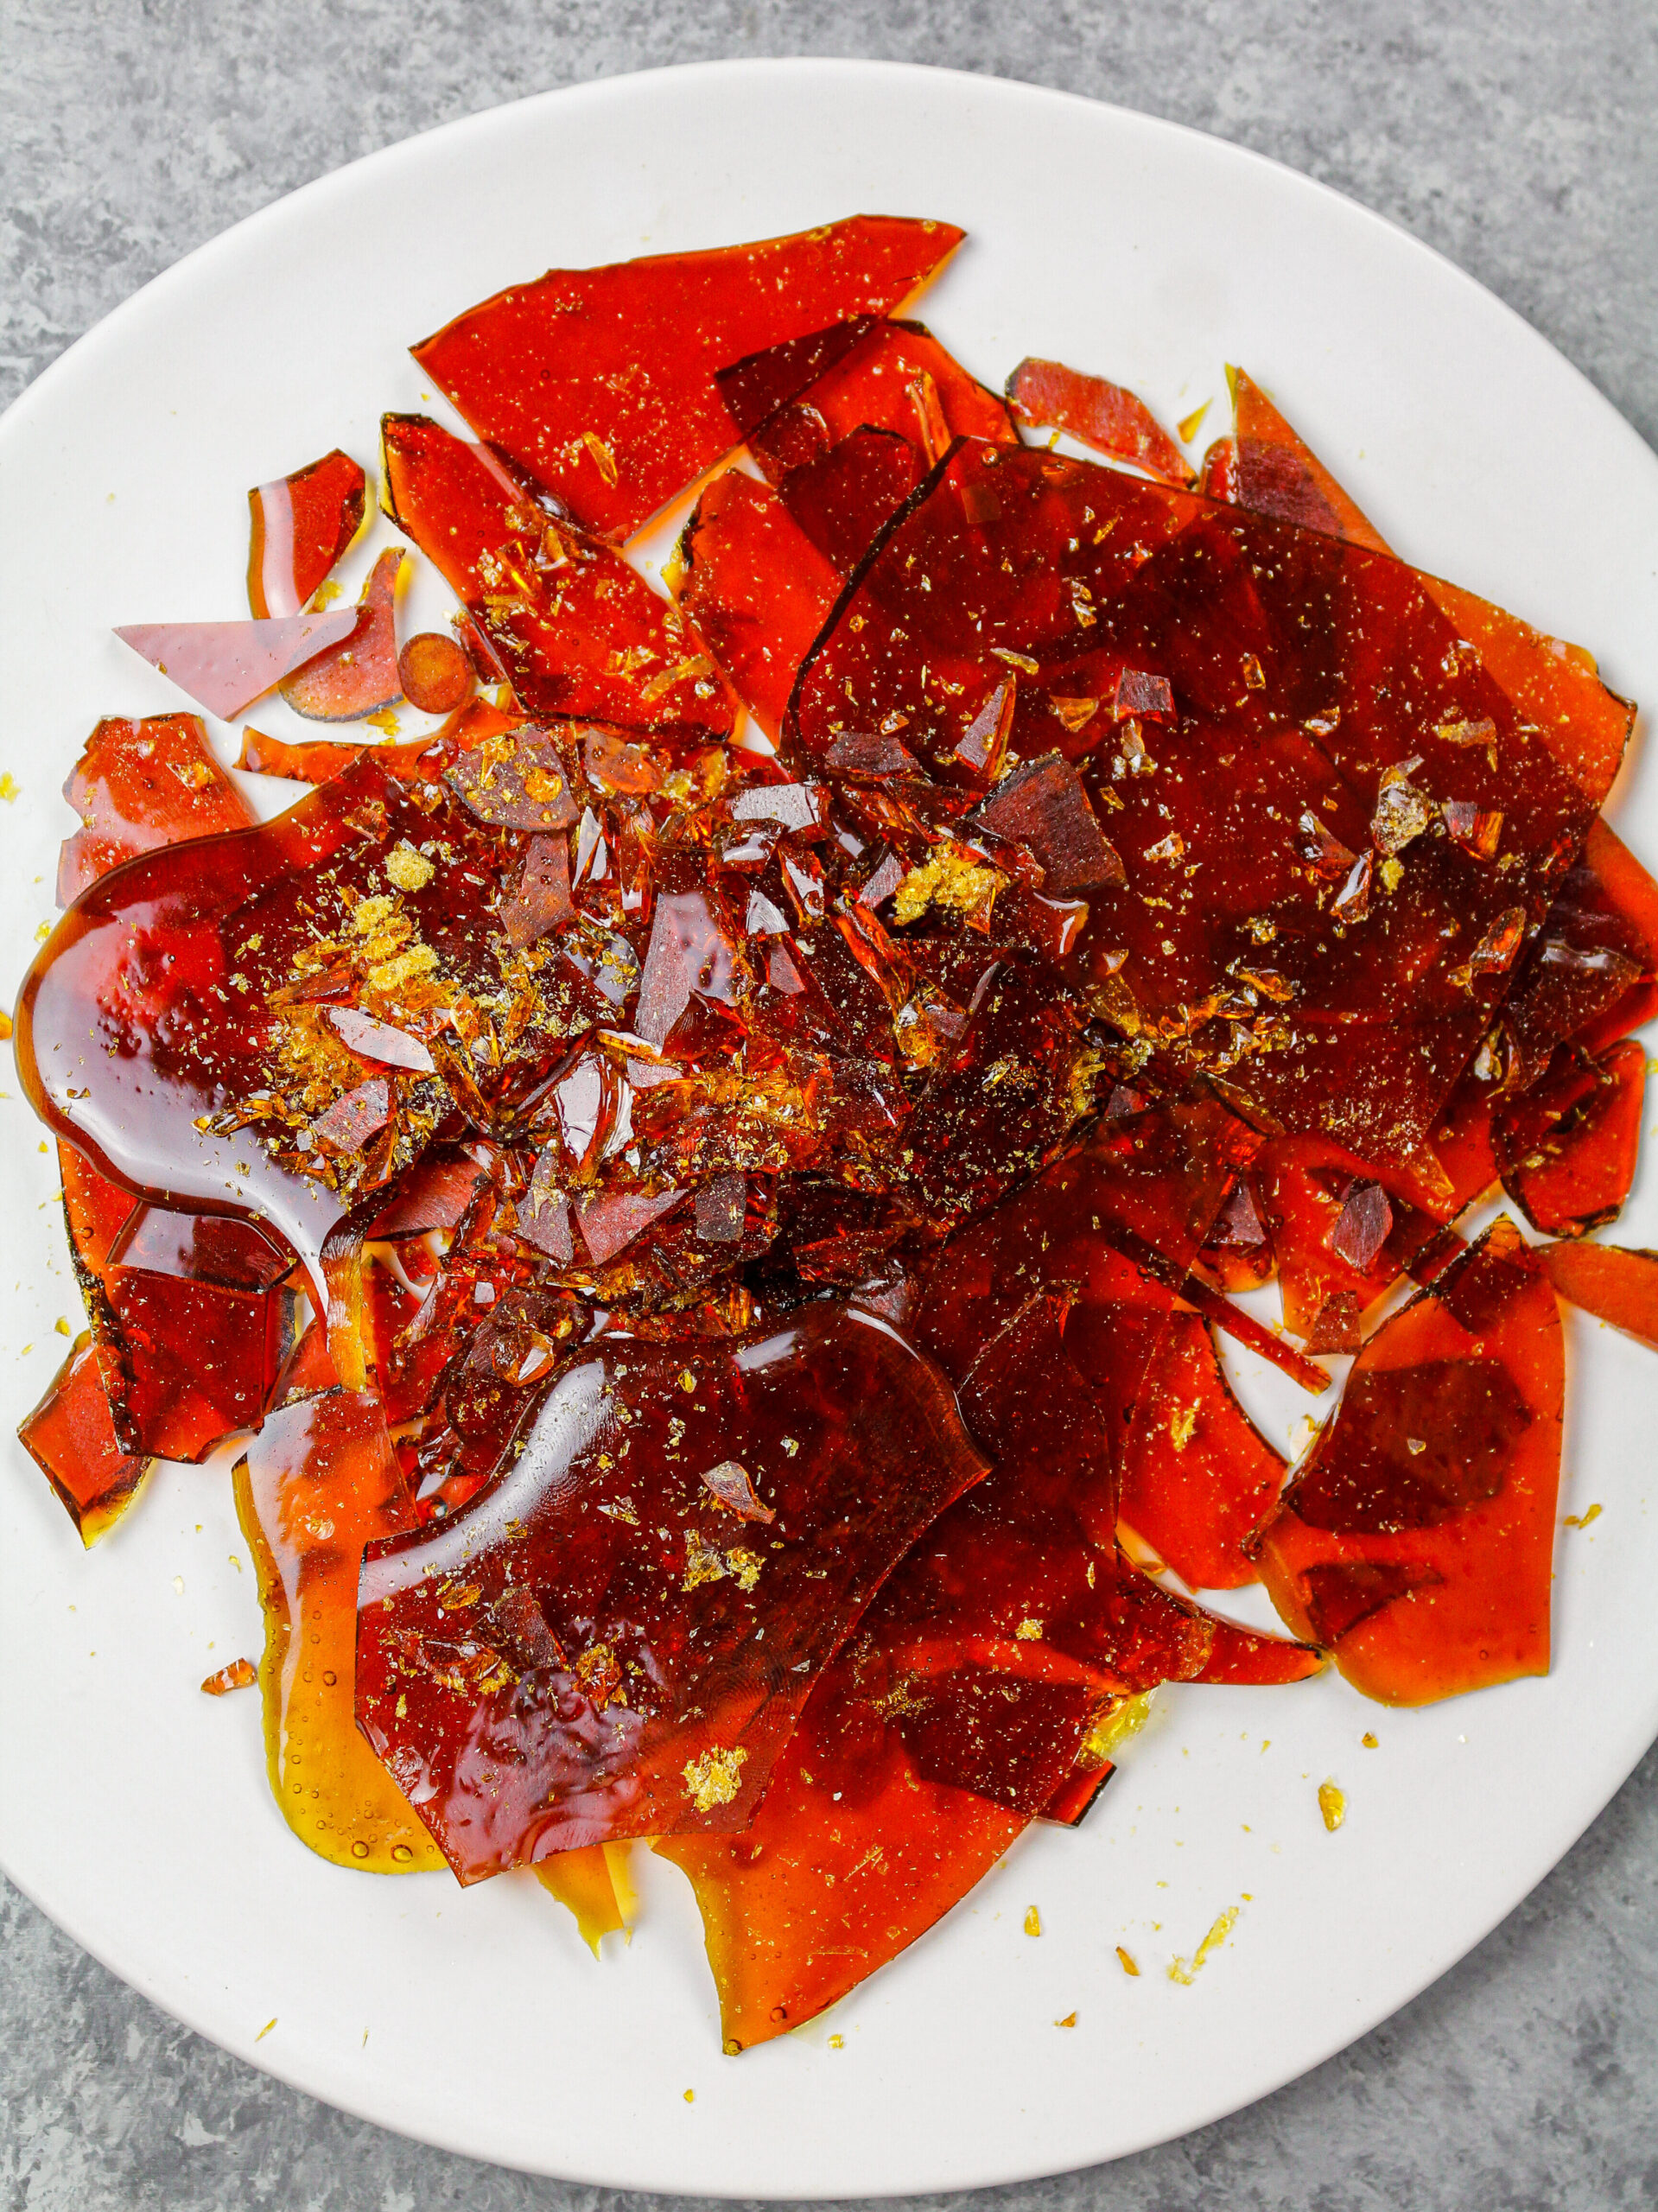 image of caramelized sugar shards resting on a plate